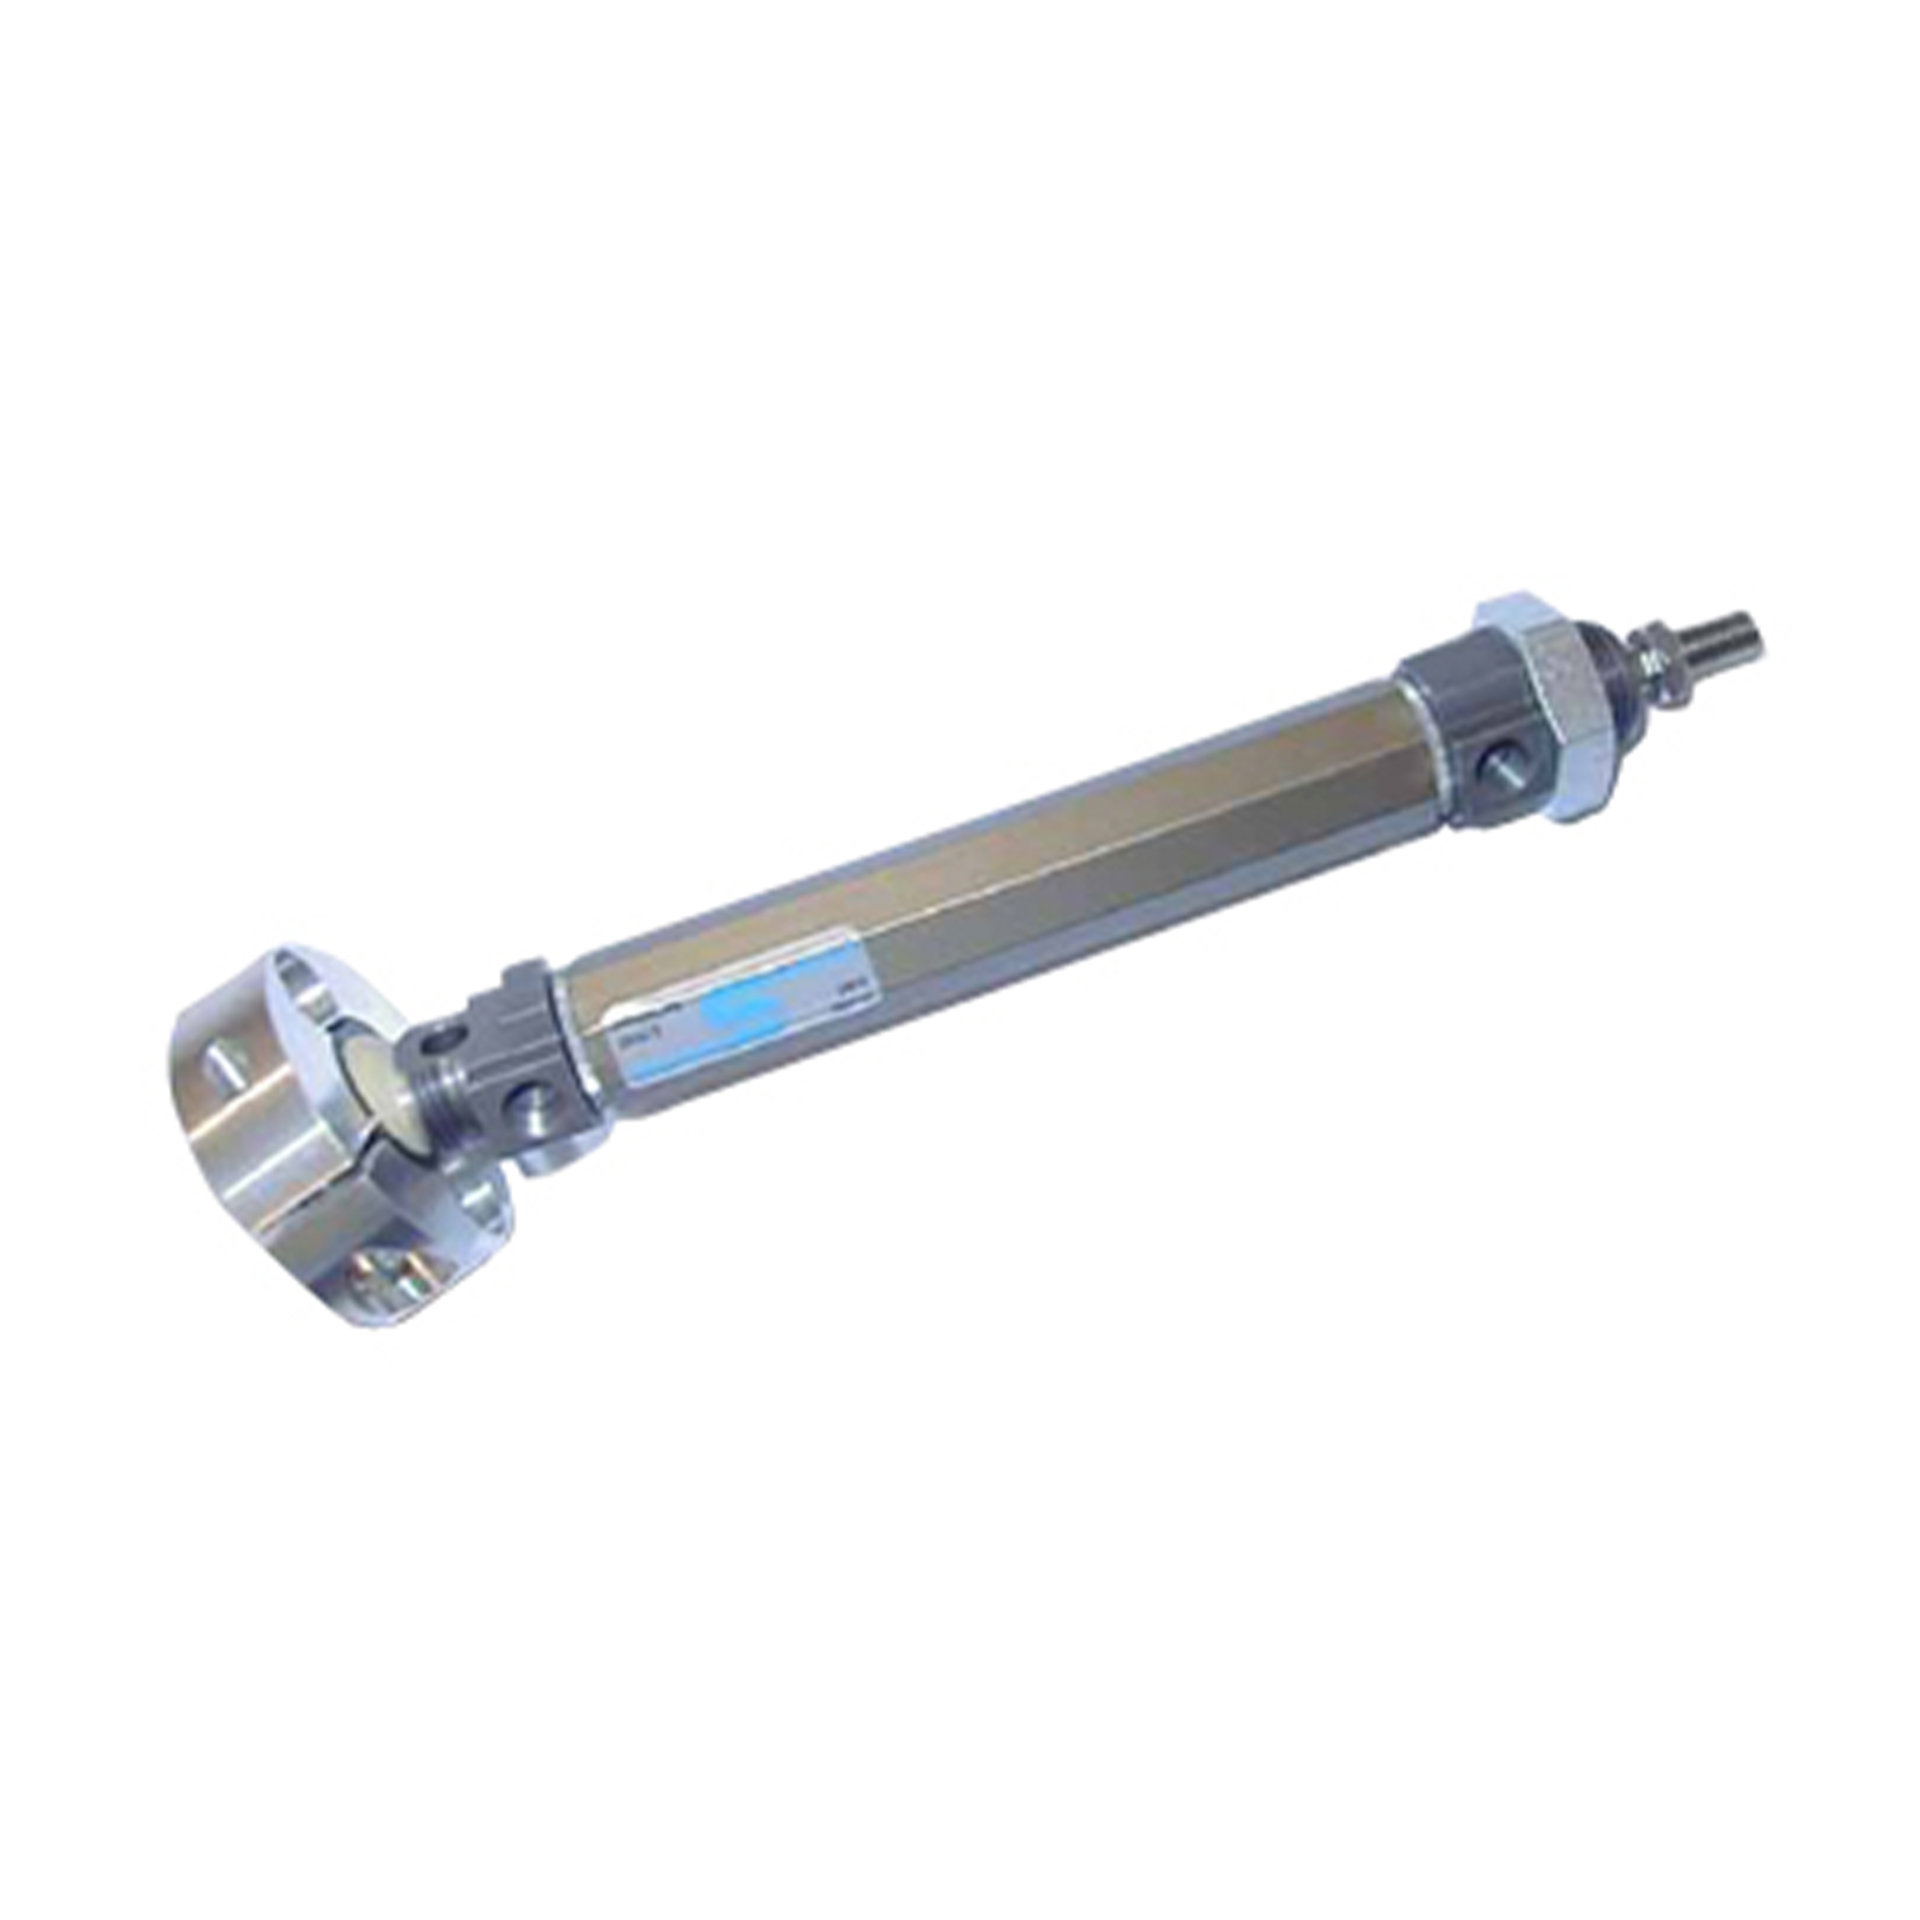 Cylinder with ball joint mount